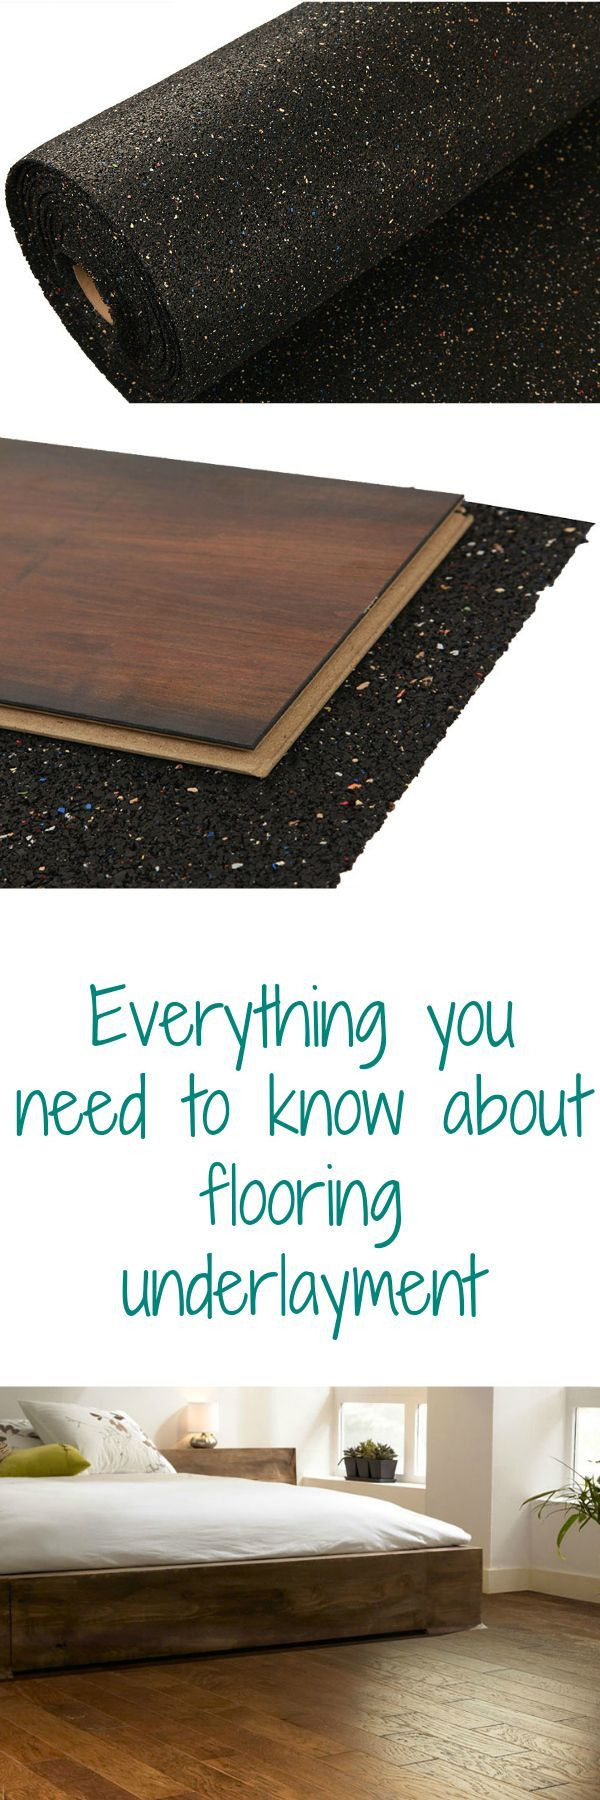 hardwood vs bamboo vs cork flooring of 262 best flooringinc contributors images on pinterest flooring within everything you need to know about flooring underlayment your questions answered